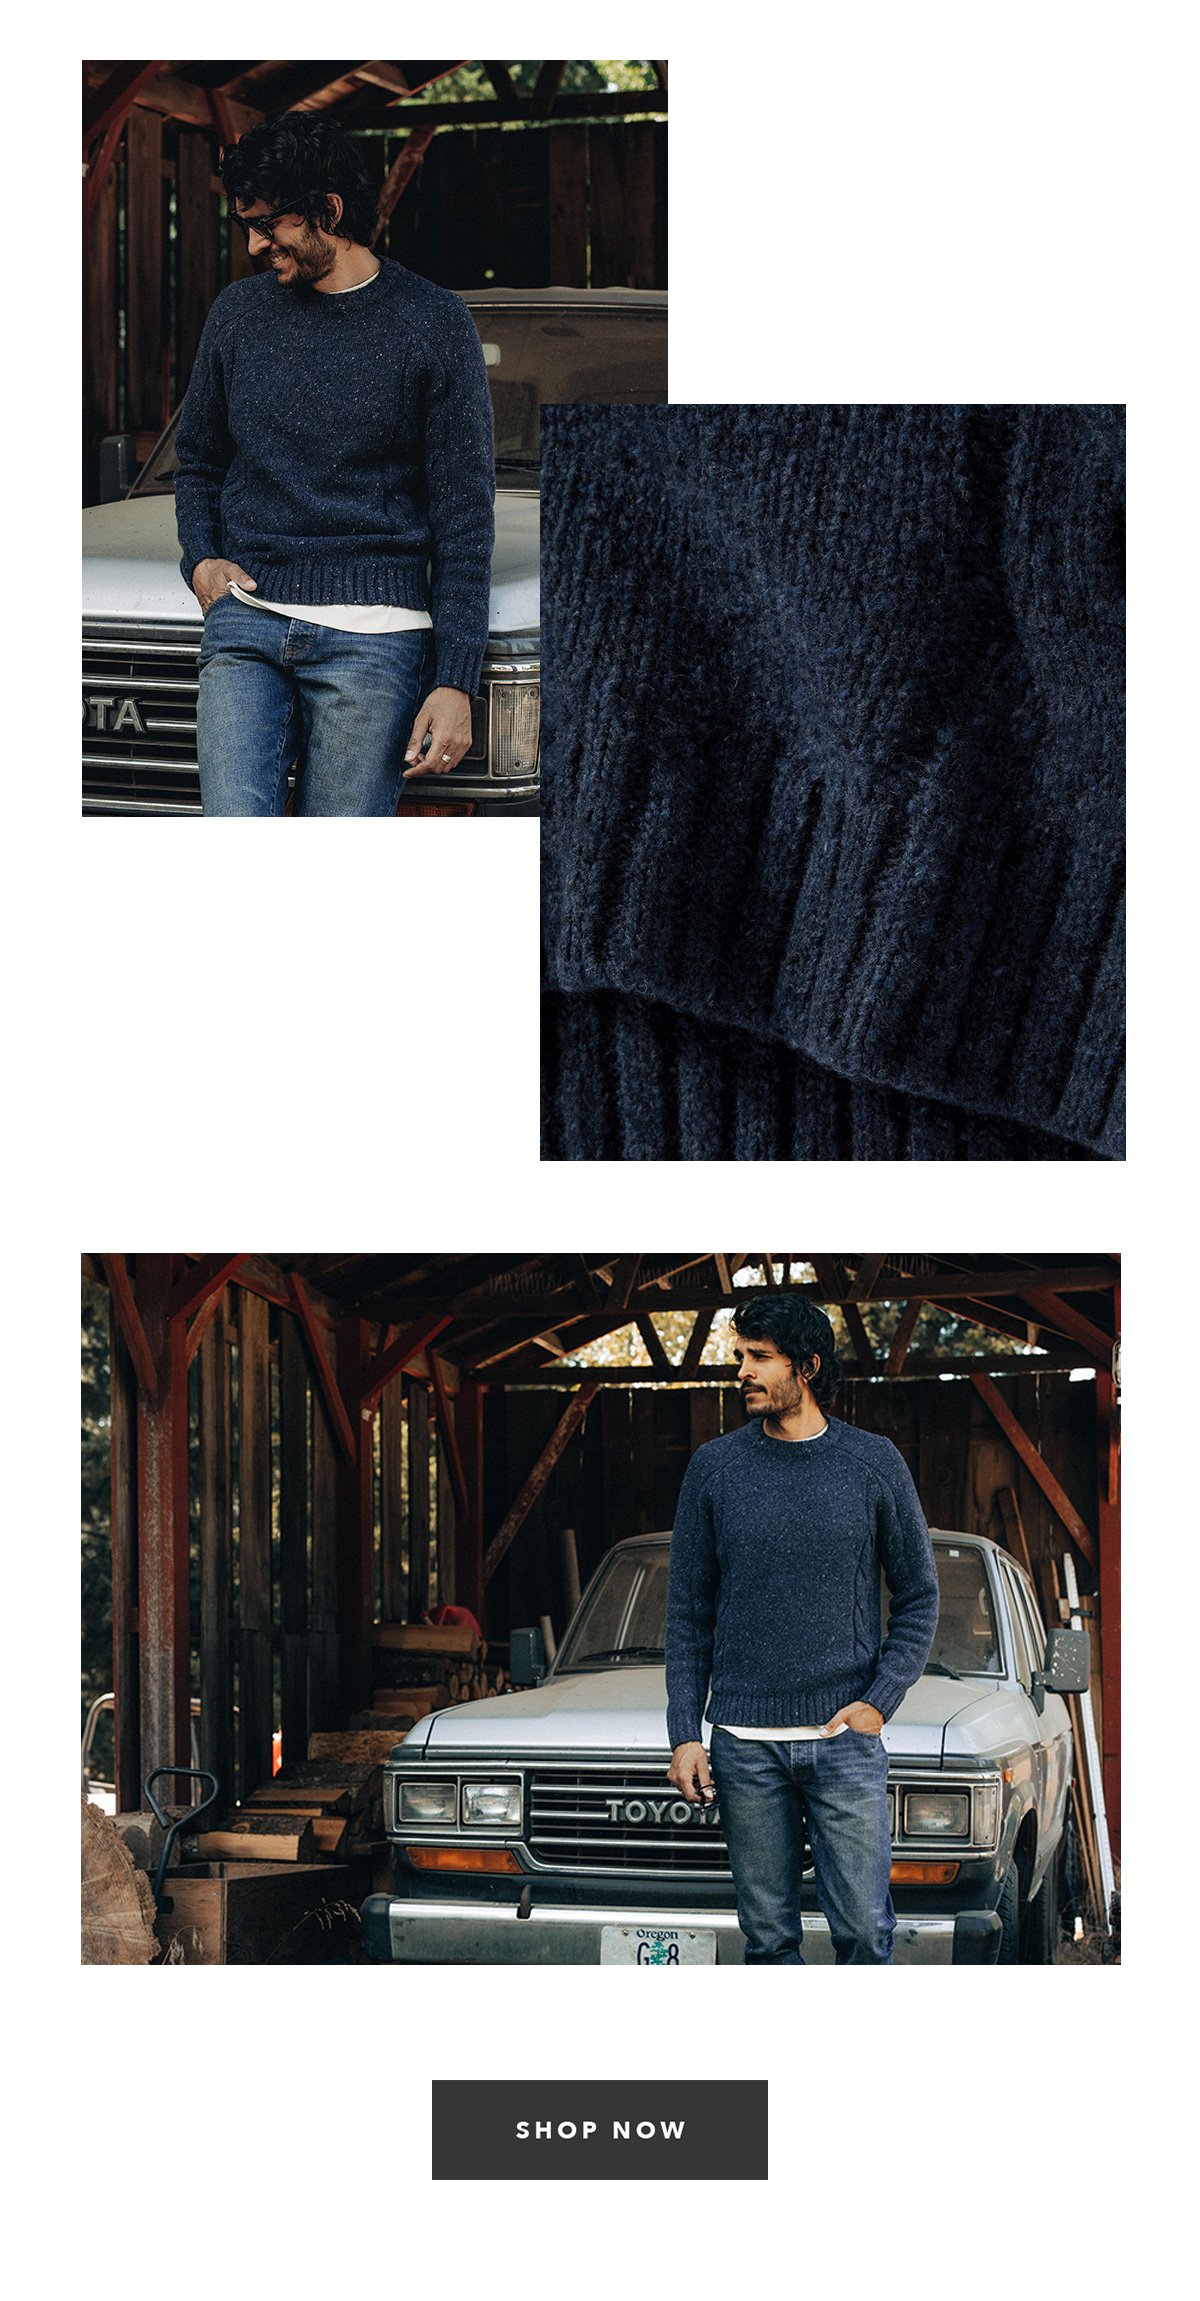 Editorial Images of the Topside Sweater